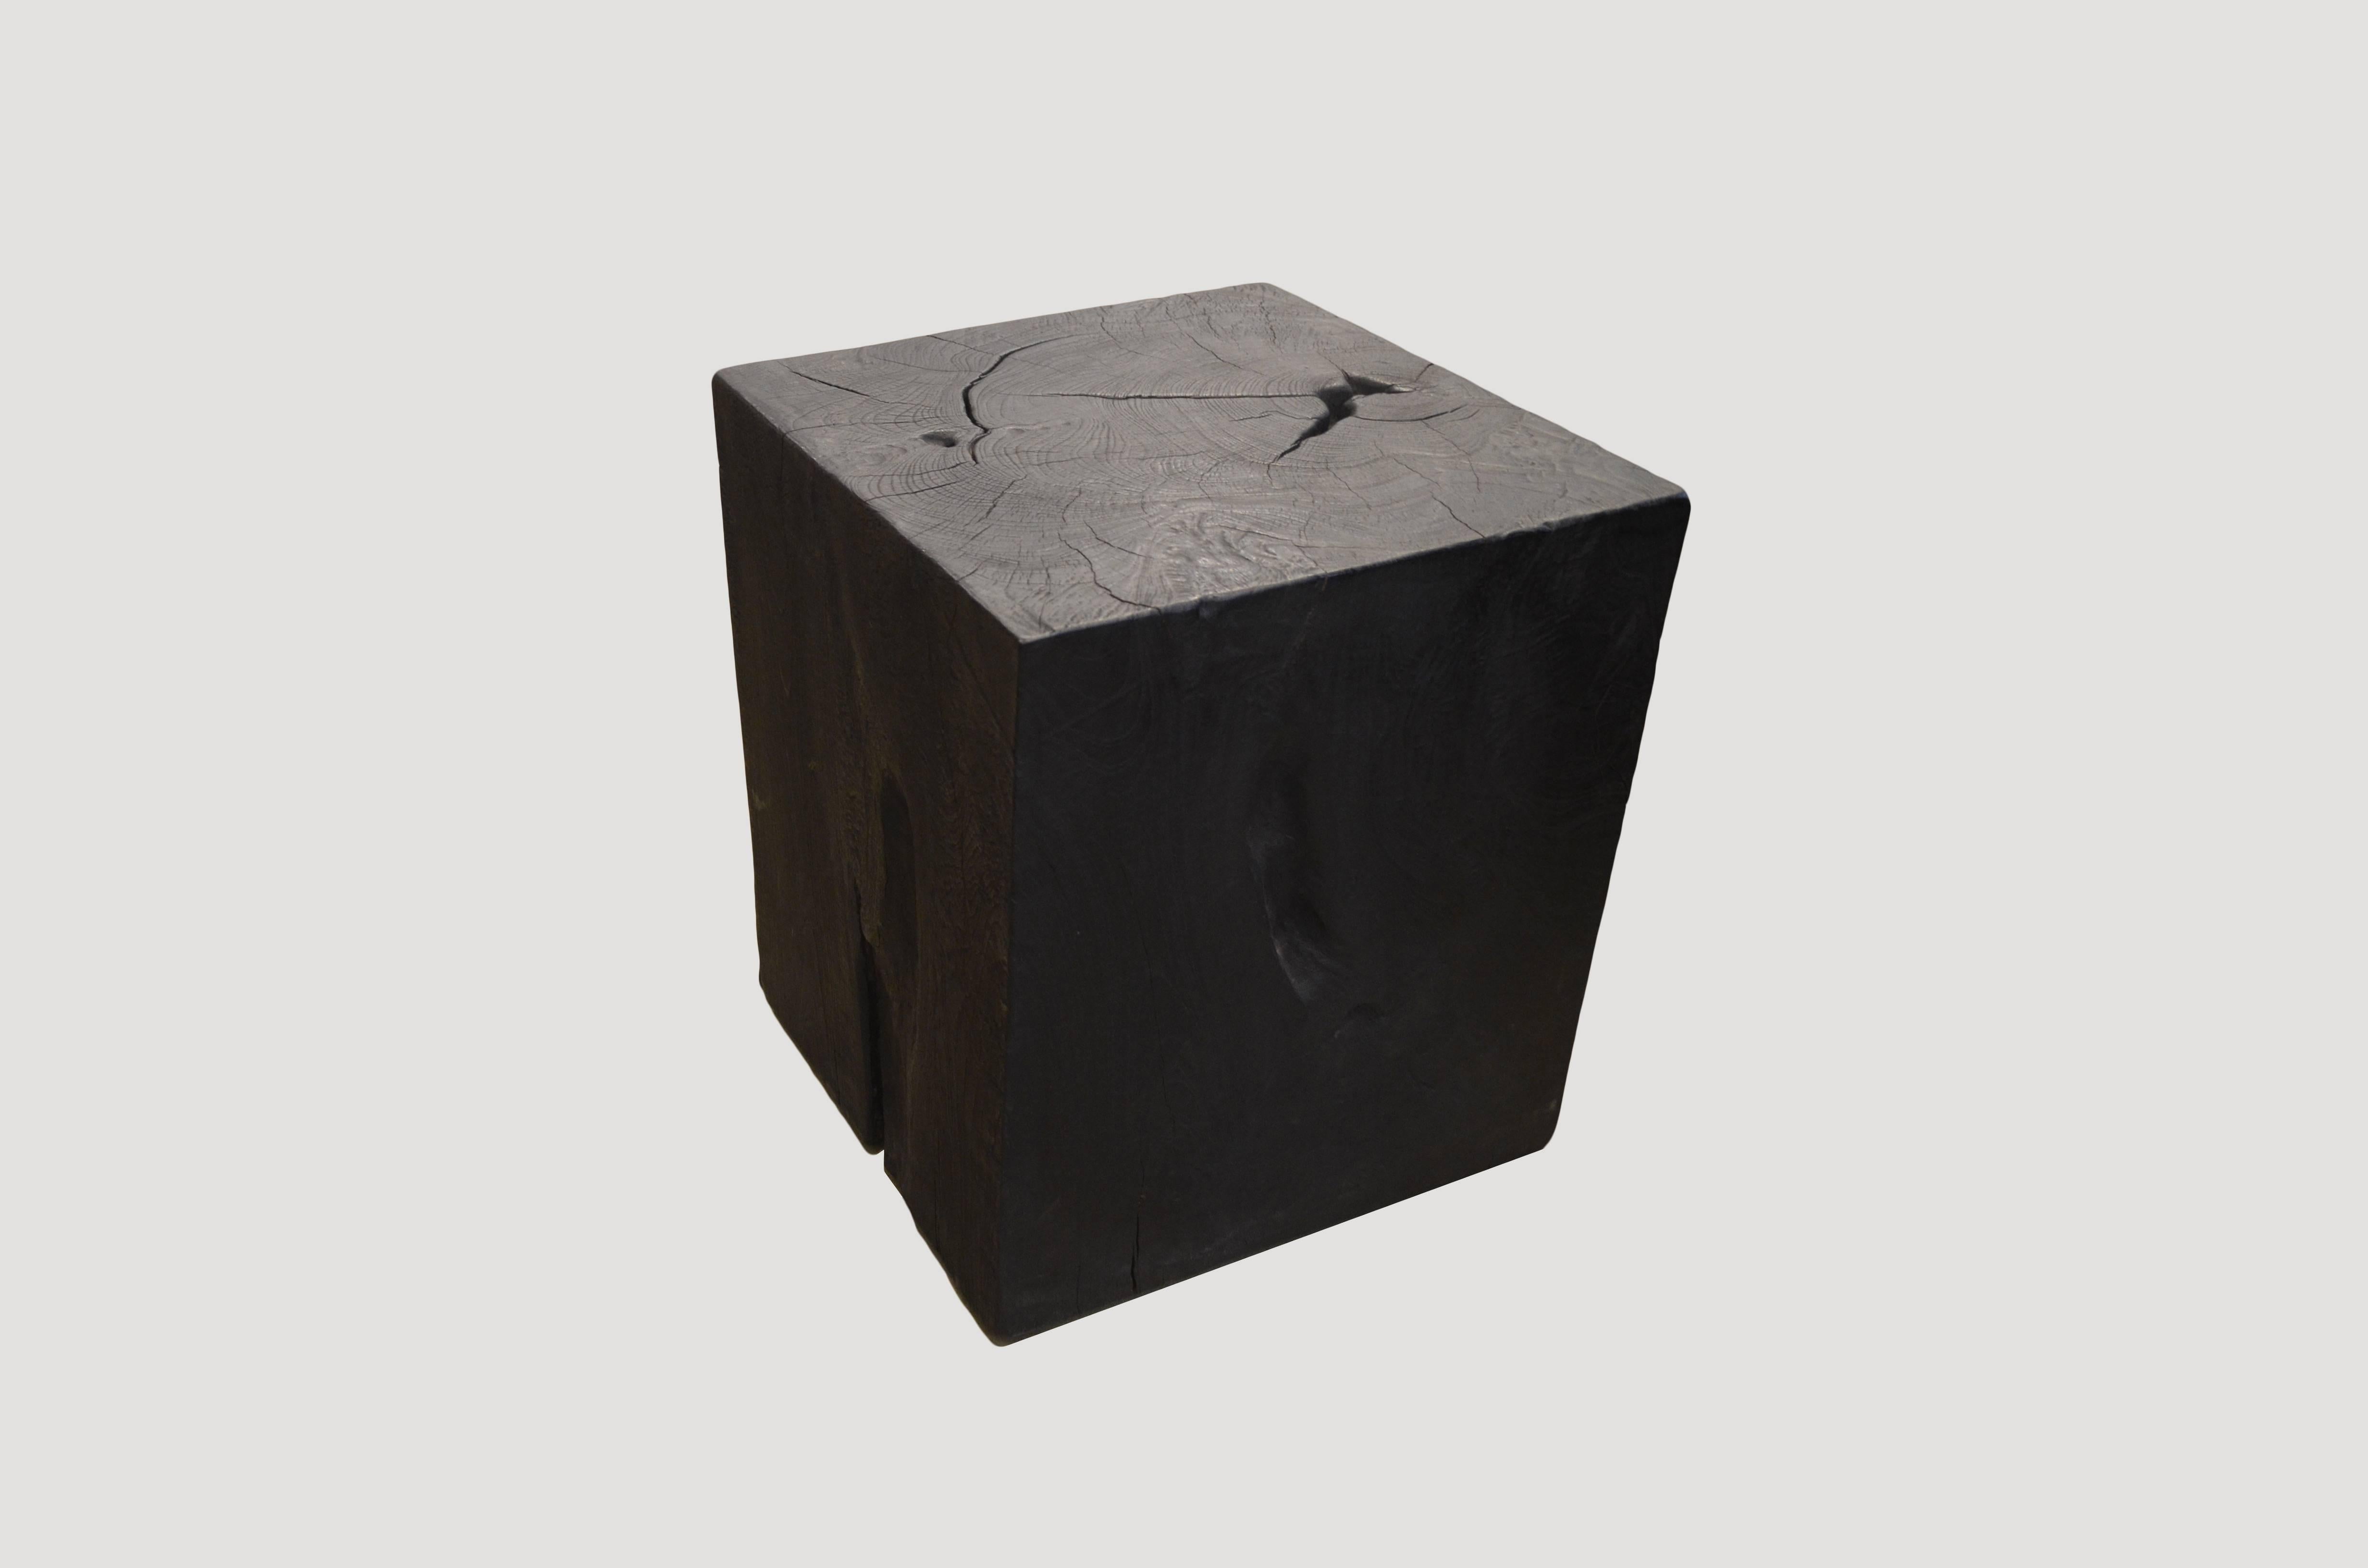 Solid teak side table. Burnt, sanded and sealed with a smooth finish.

The Triple Burnt Collection represents a unique line of modern furniture made from solid organic wood. Burnt three times to produce a rich, charcoal finish with impressive